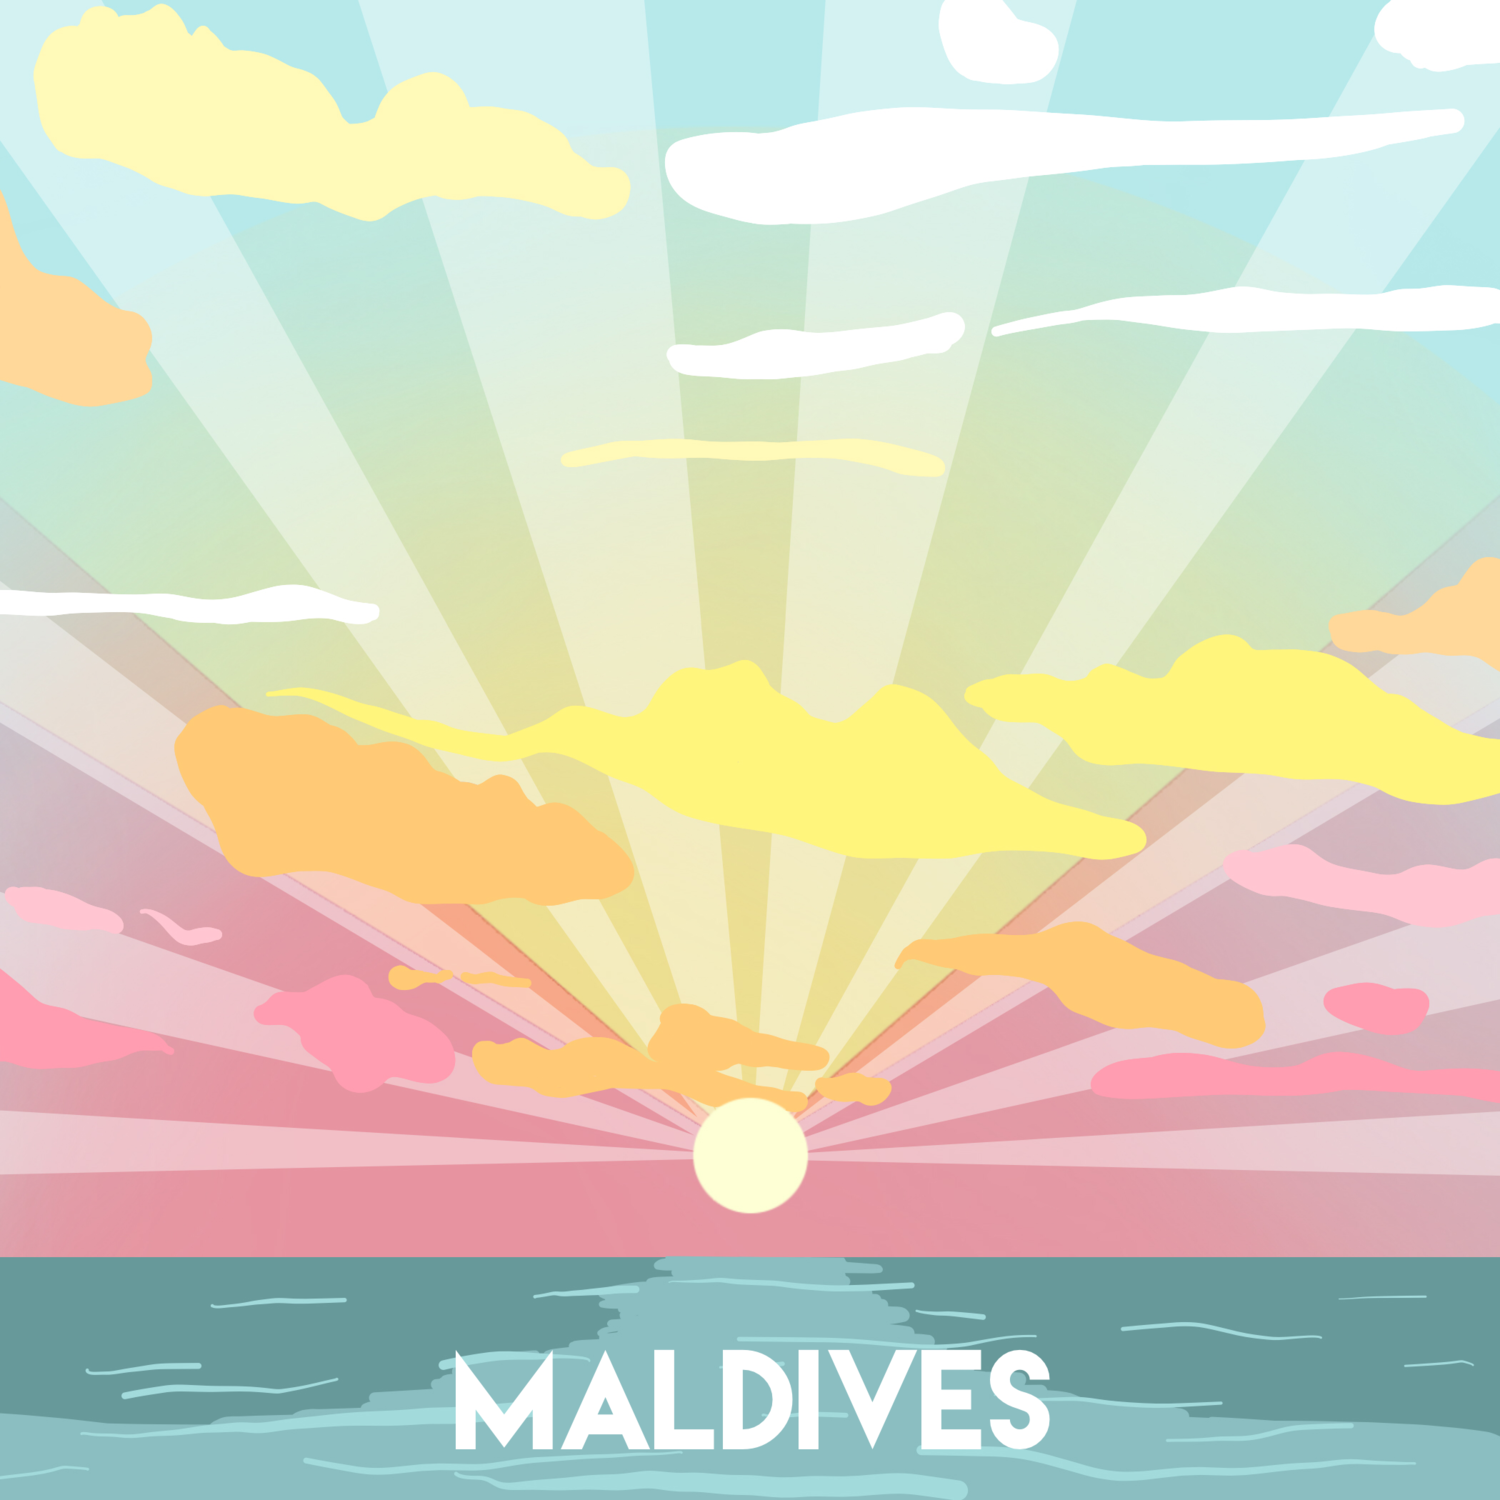 Trio of Vintage Style Travel Posters / Maldives